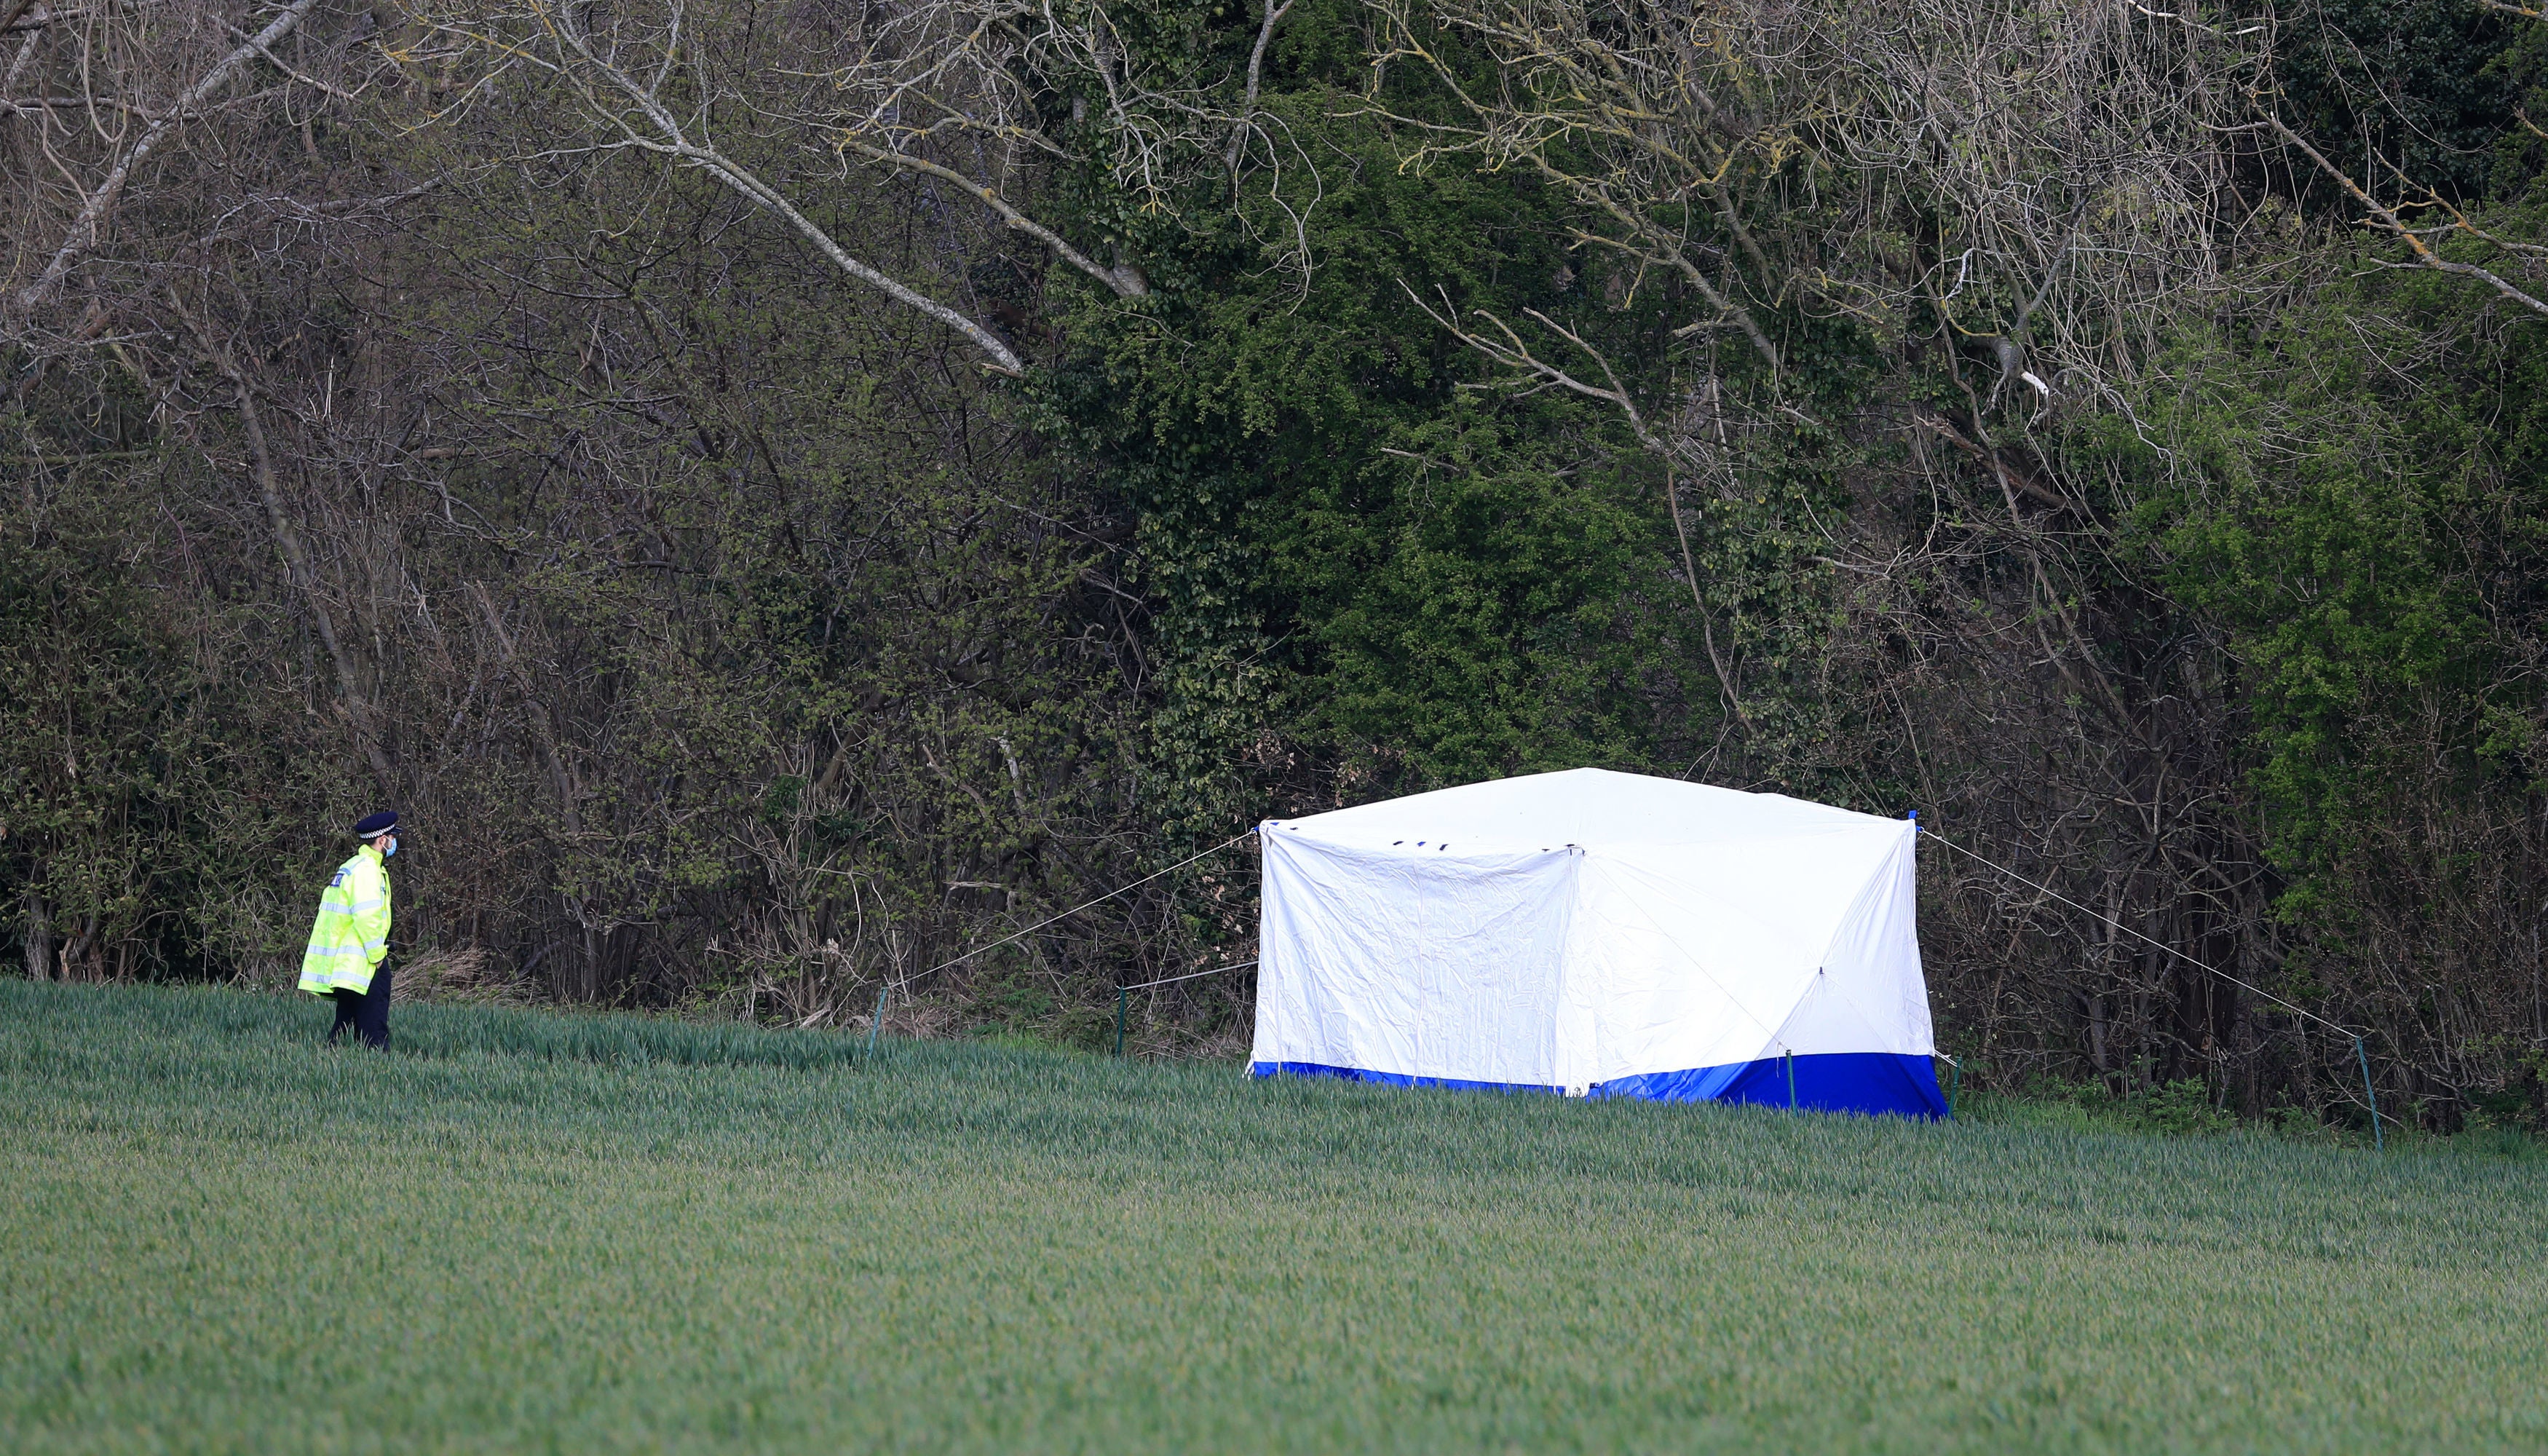 A police officer stands near a forensic tent on the outskirts of Akholt Wood in Snowdown, Kent